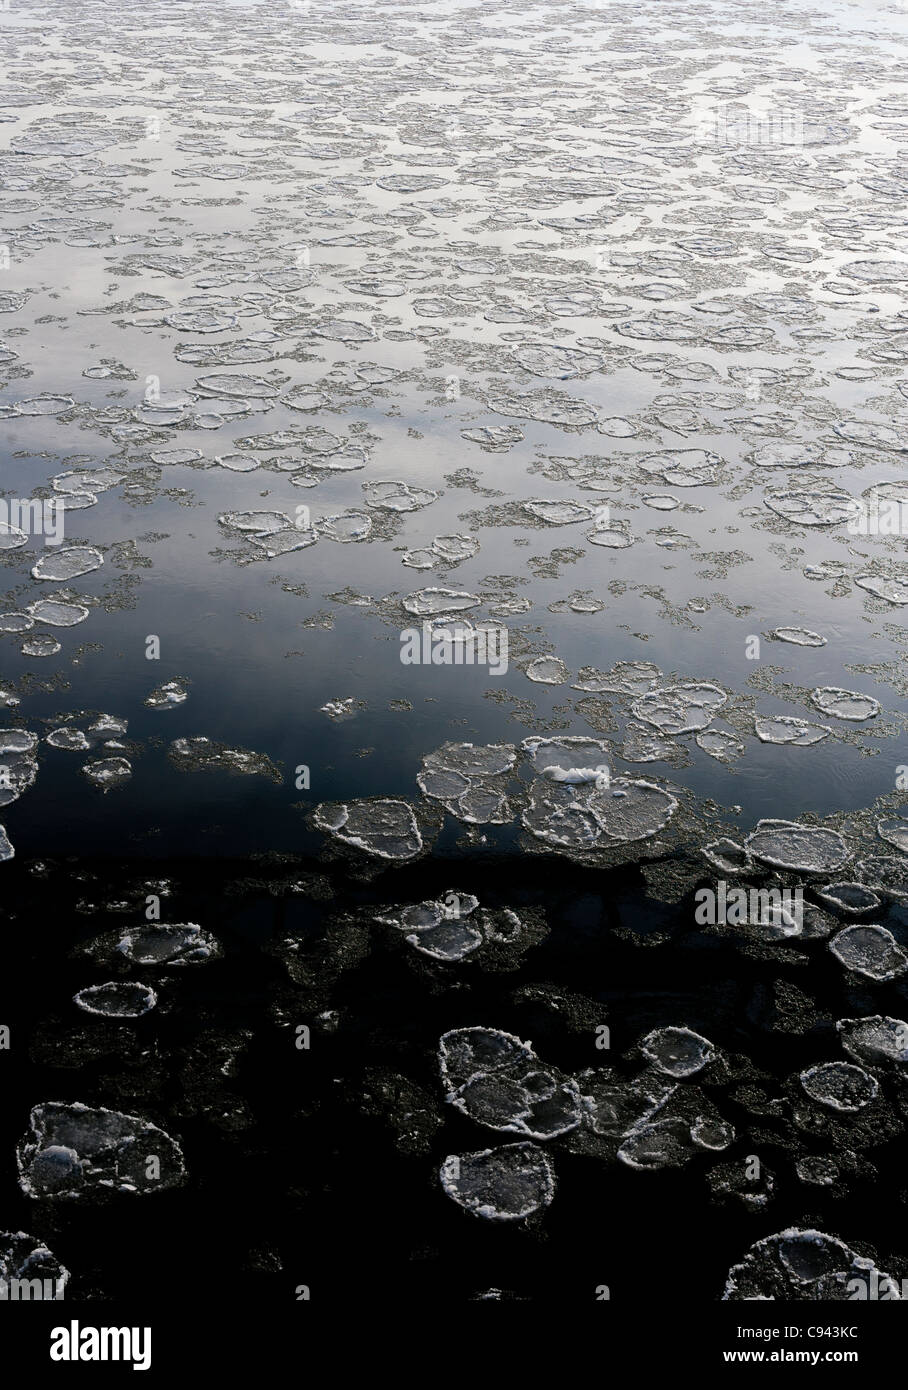 Ice flows on river. Stock Photo